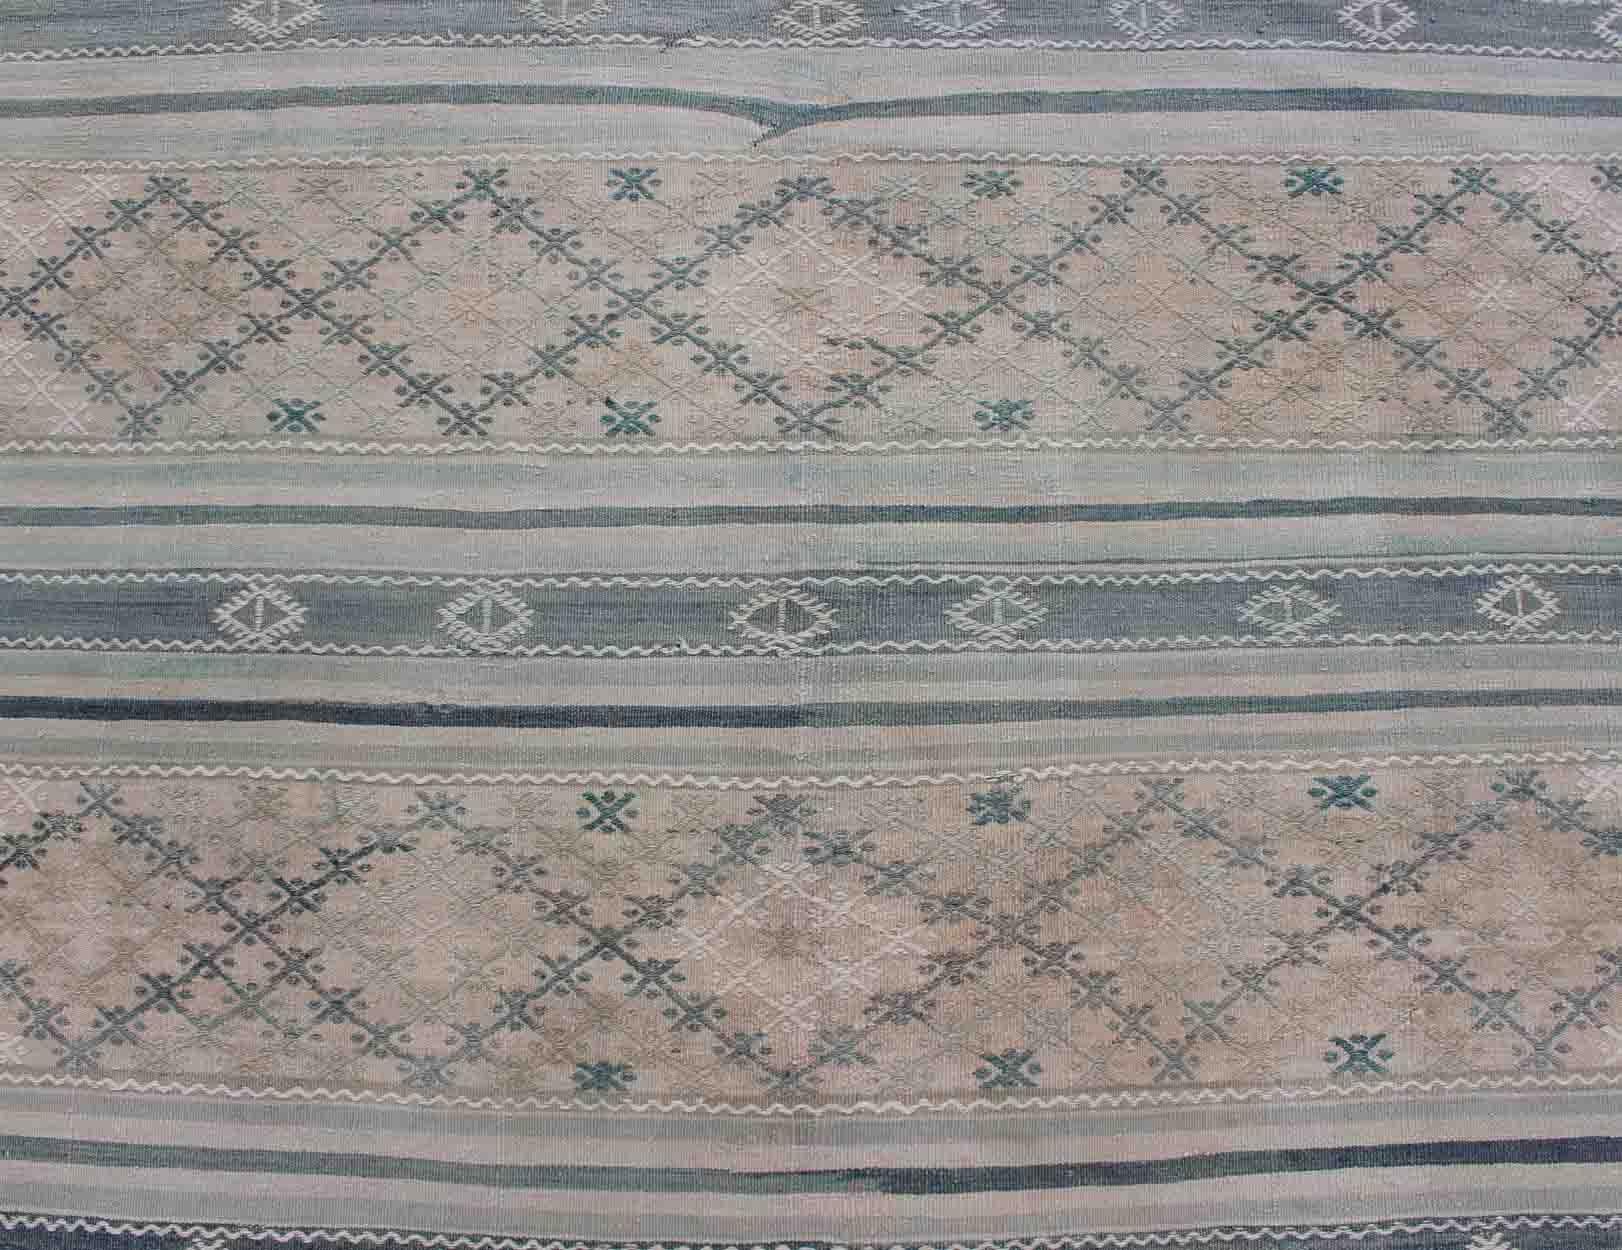 Vintage Turkish Flat-Weave Kilim with Embroideries in Diamonds and Stripes 3